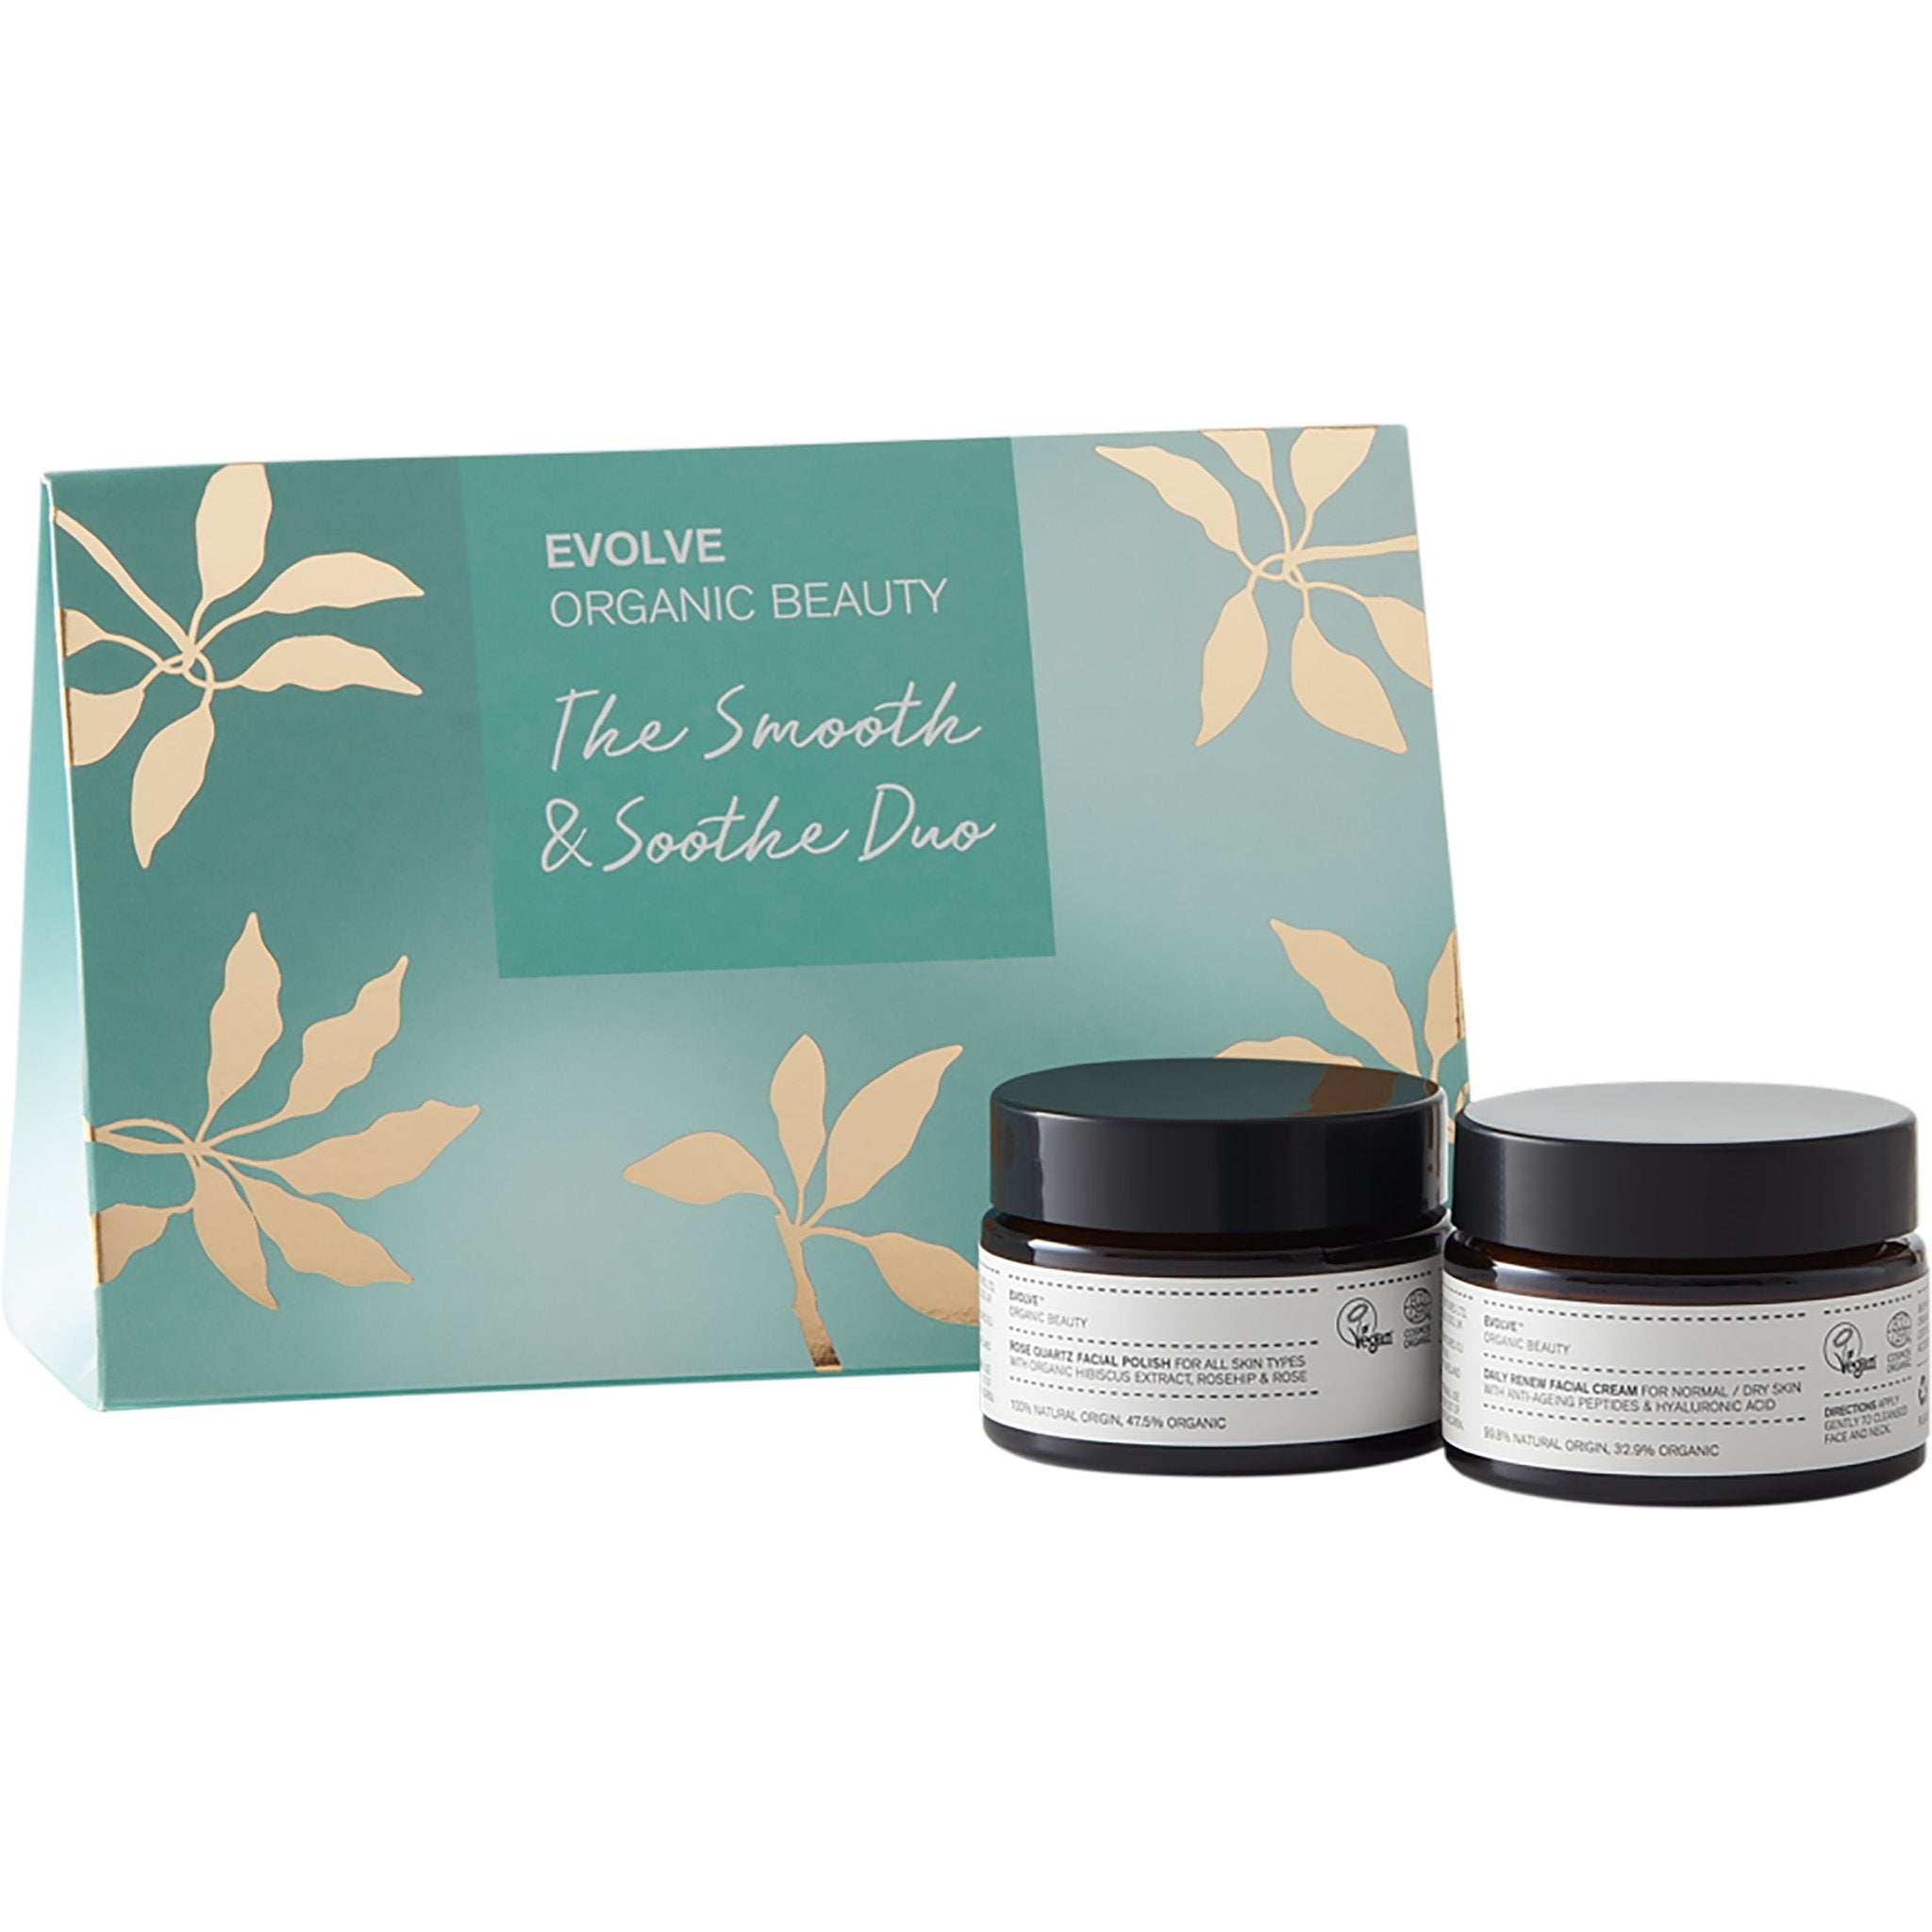 The Smooth & Soothe Duo - Worth £29 - mypure.co.uk